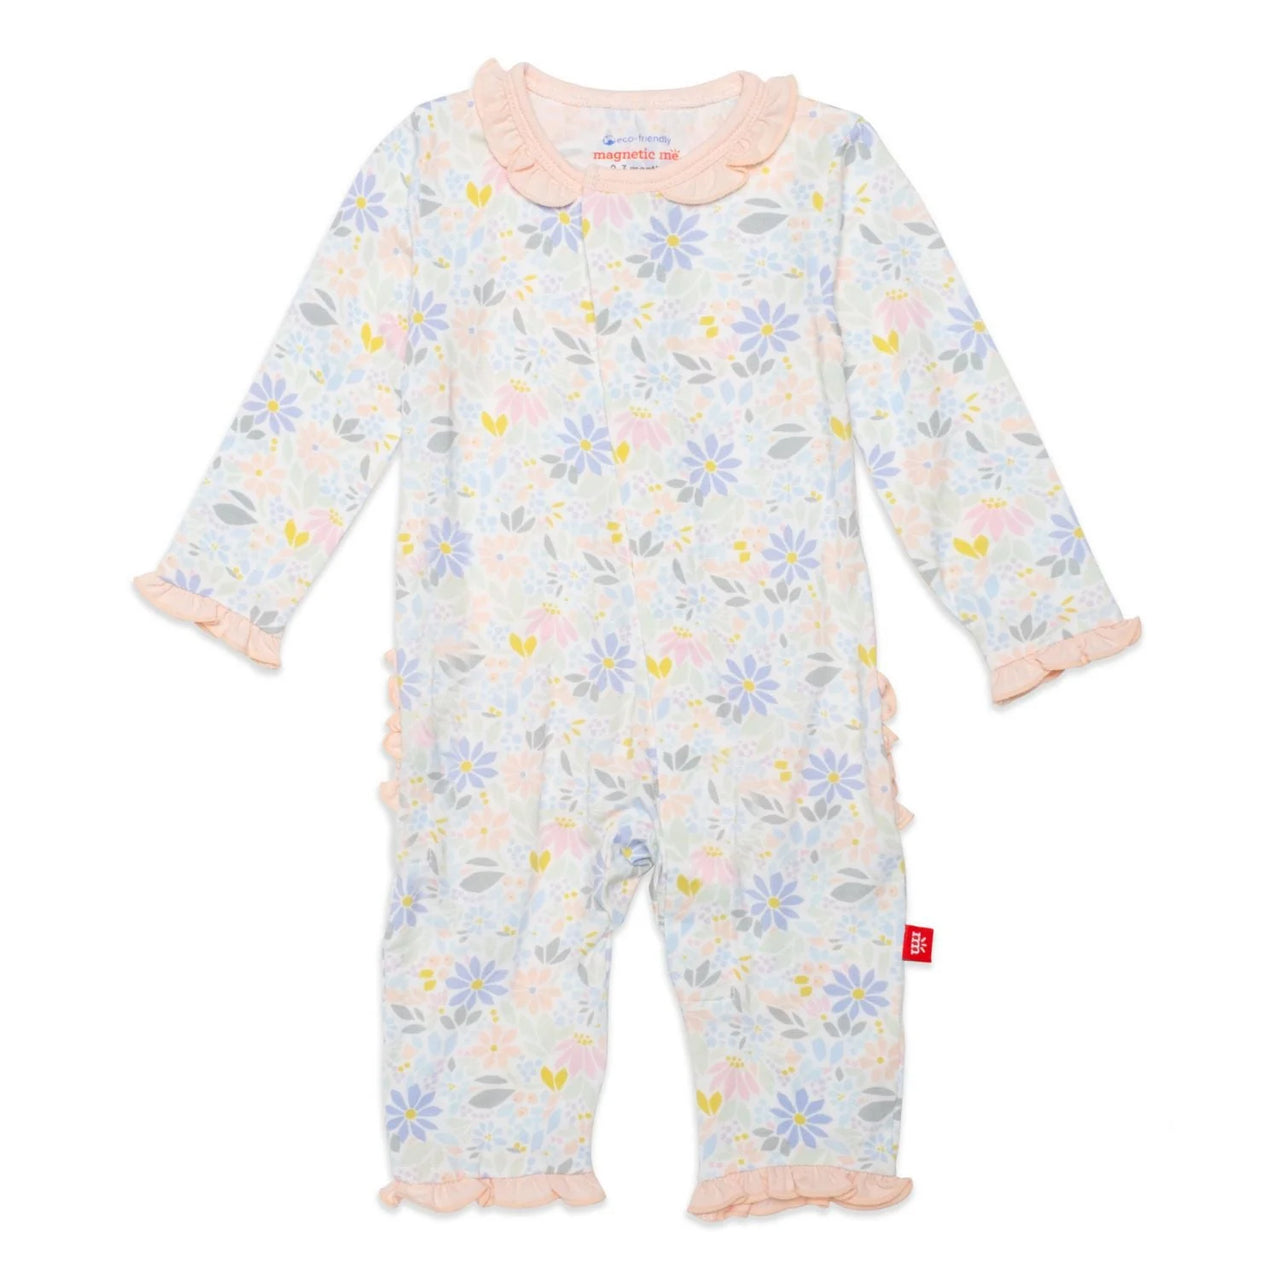 Darby Coverall with Ruffles